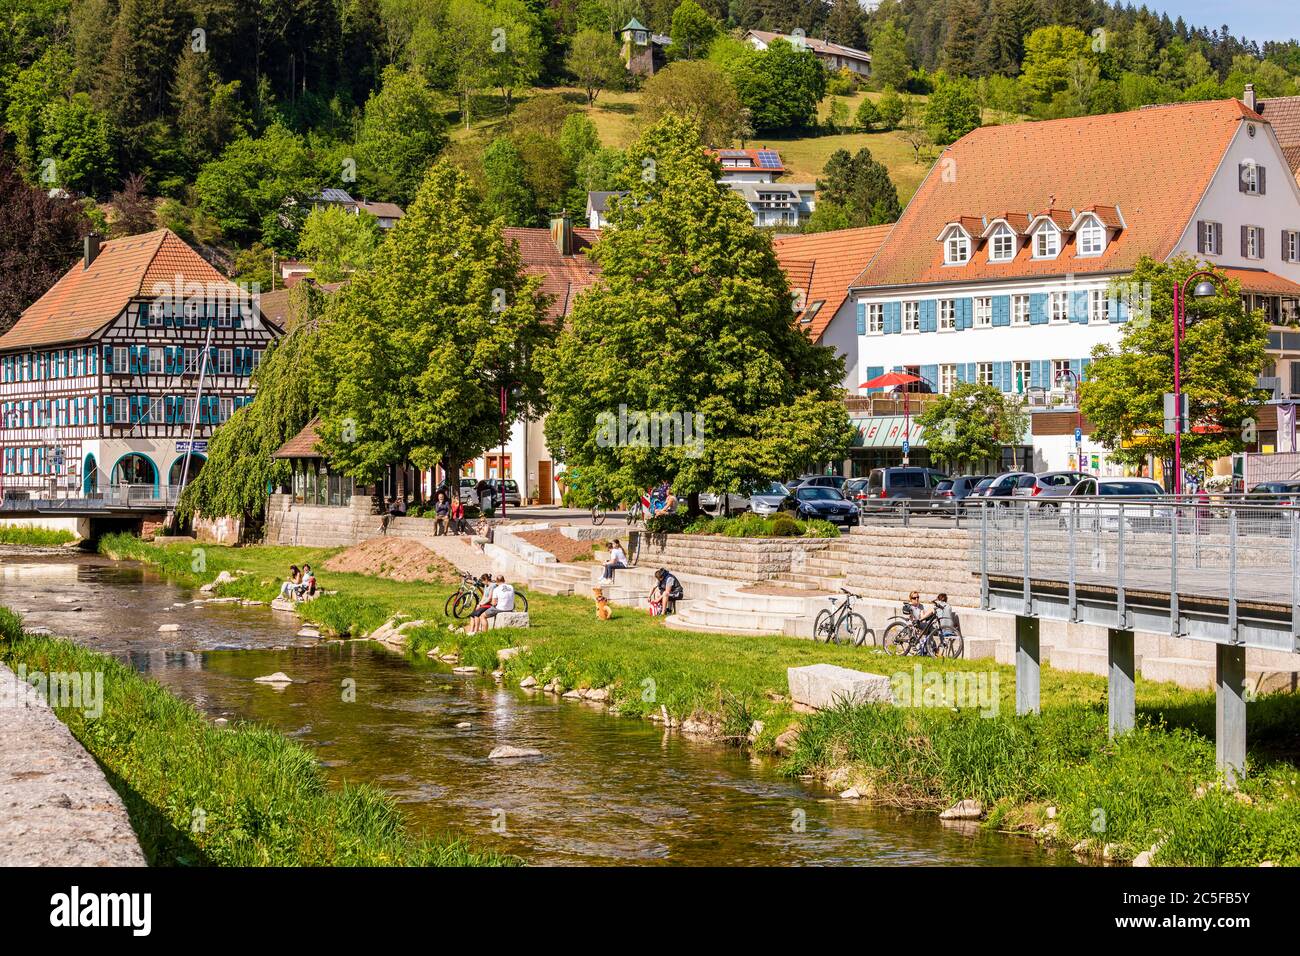 Houses in the Old Town, River Schiltach, Schiltach, Black Forest, Baden-Wuerttemberg, Germany Stock Photo